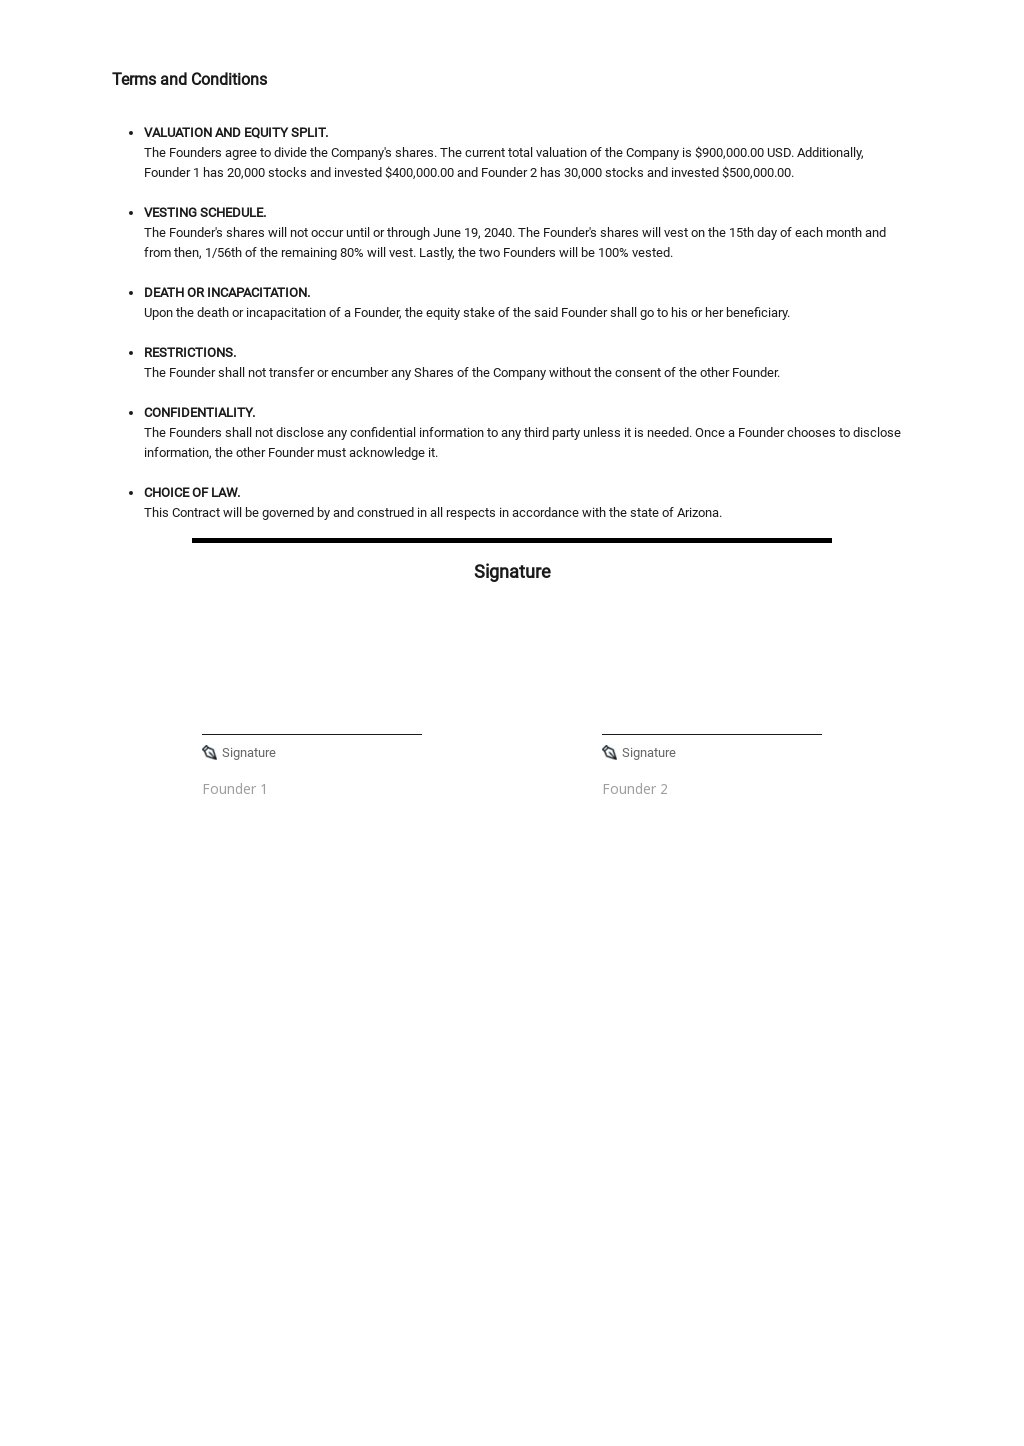 Startup Equity Contract Template 1.jpe